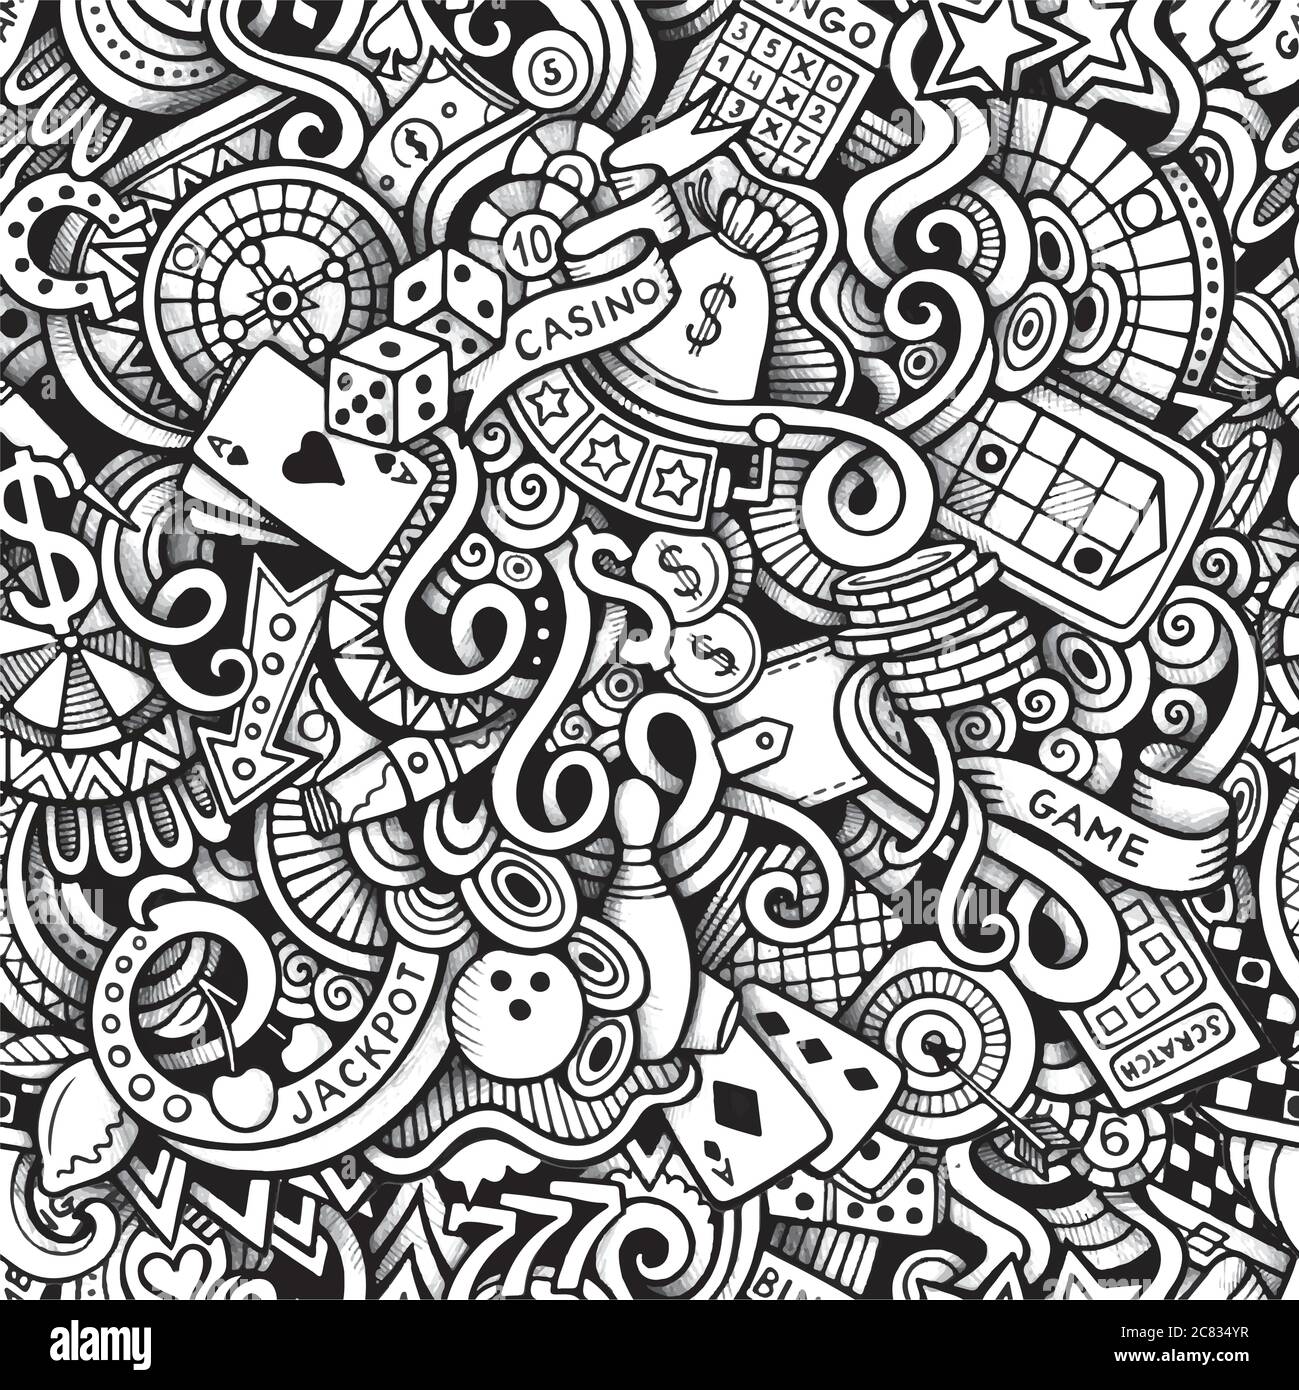 Cartoon hand-drawn doodles on the subject of Casino style theme Stock Vector